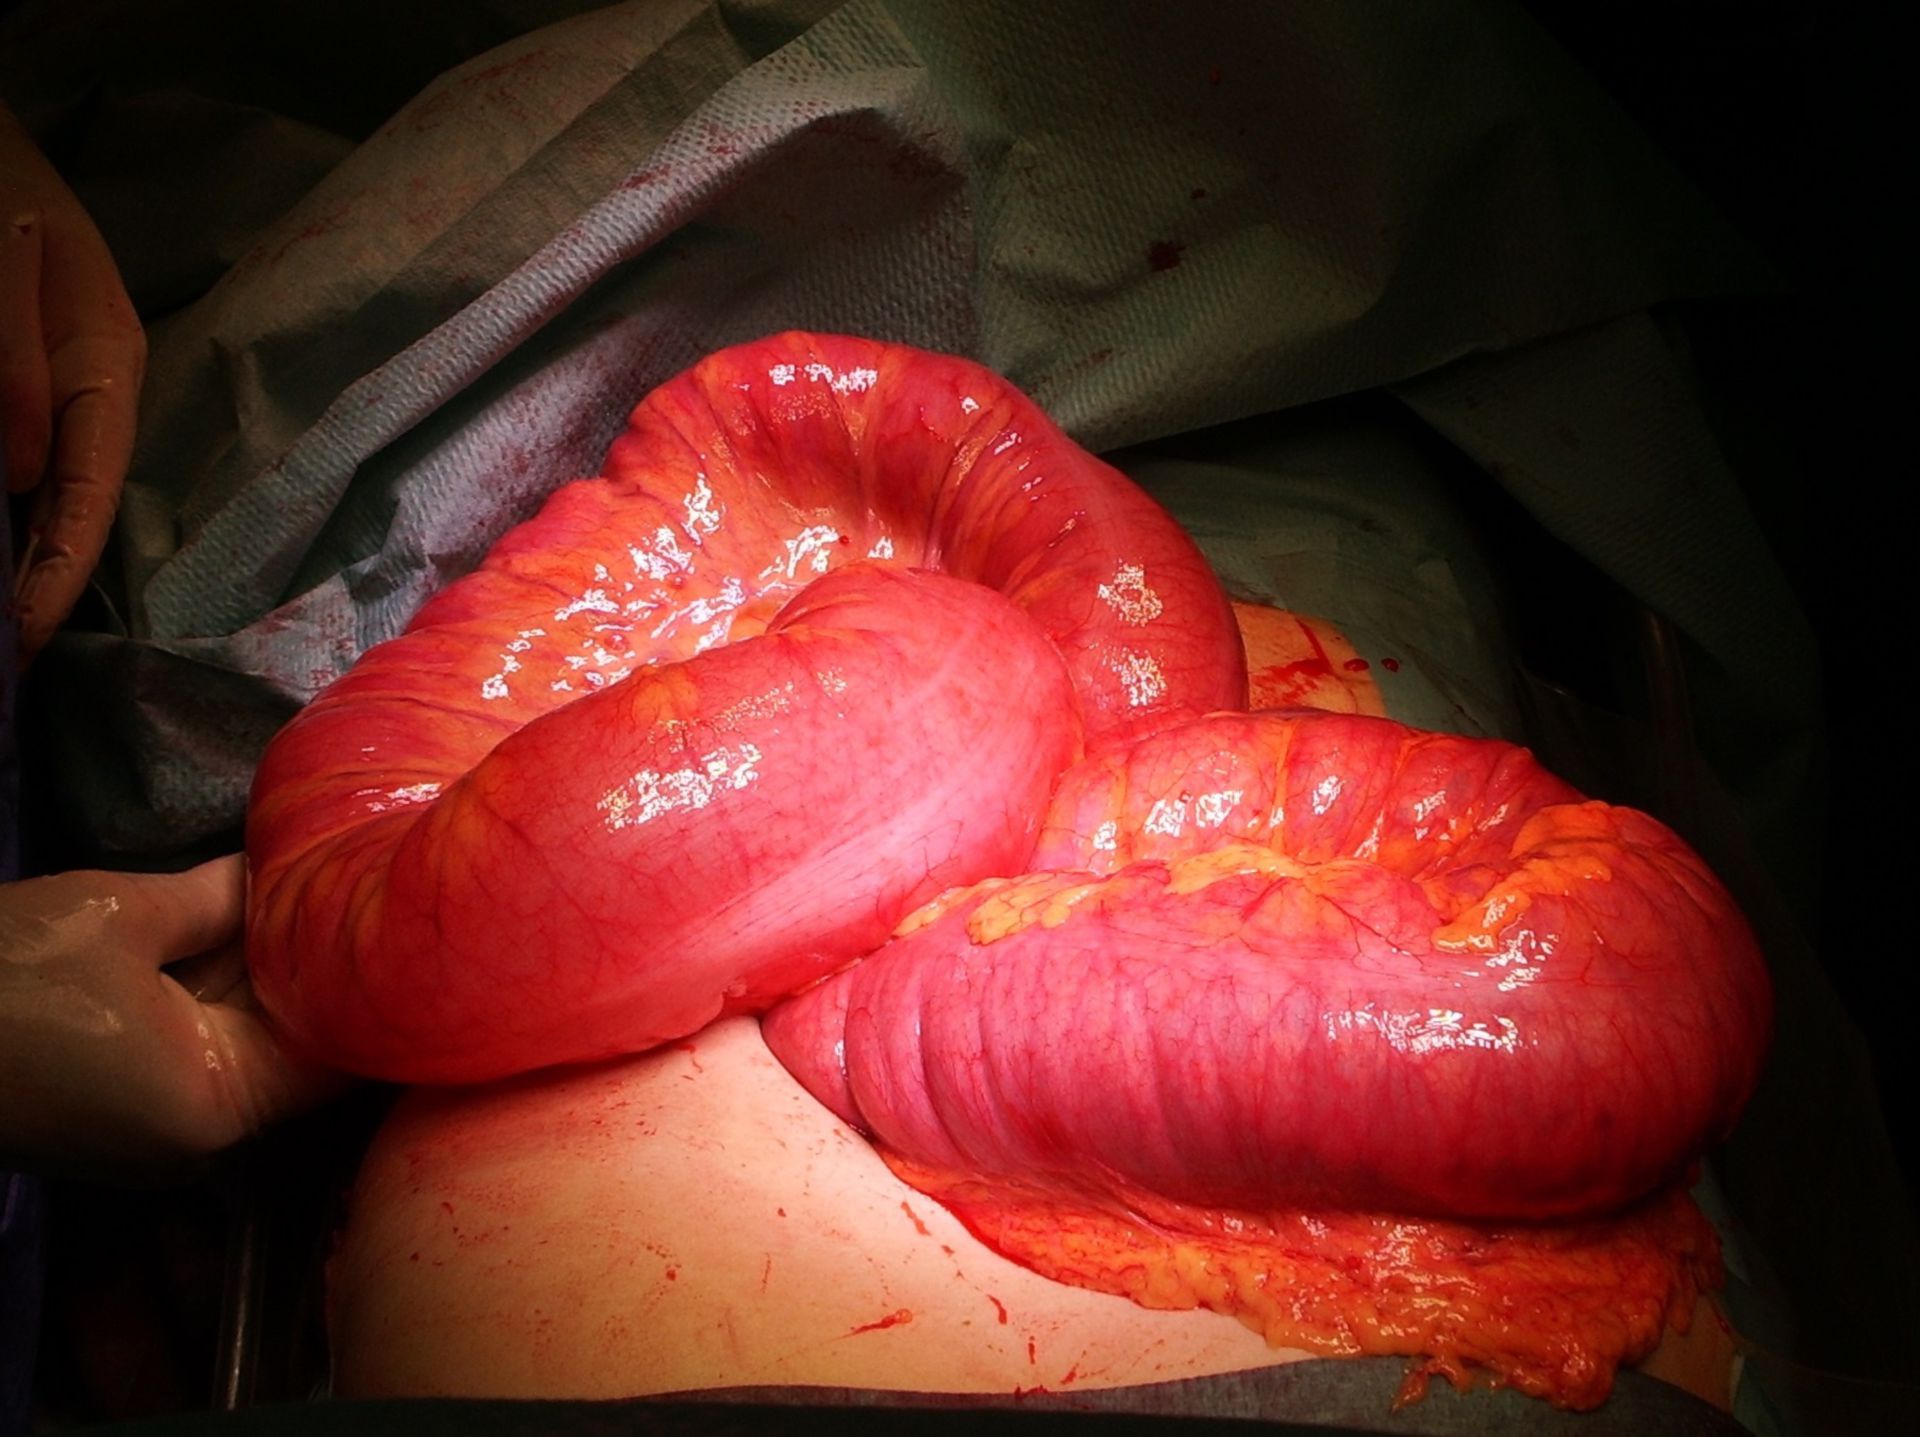 Ileus of the large intestines in enlarged sigmoid